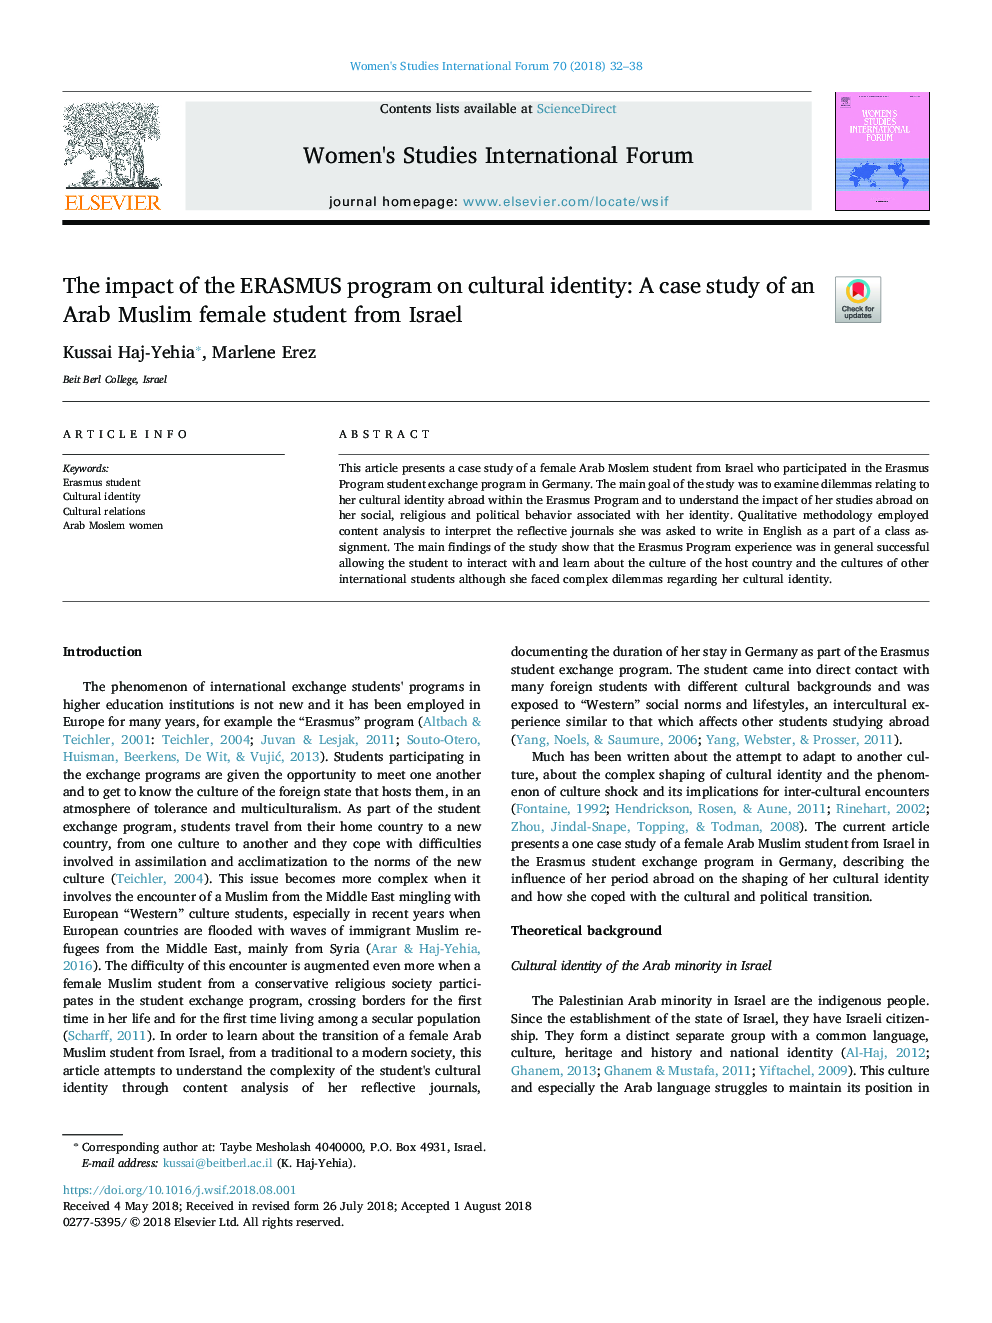 The impact of the ERASMUS program on cultural identity: A case study of an Arab Muslim female student from Israel